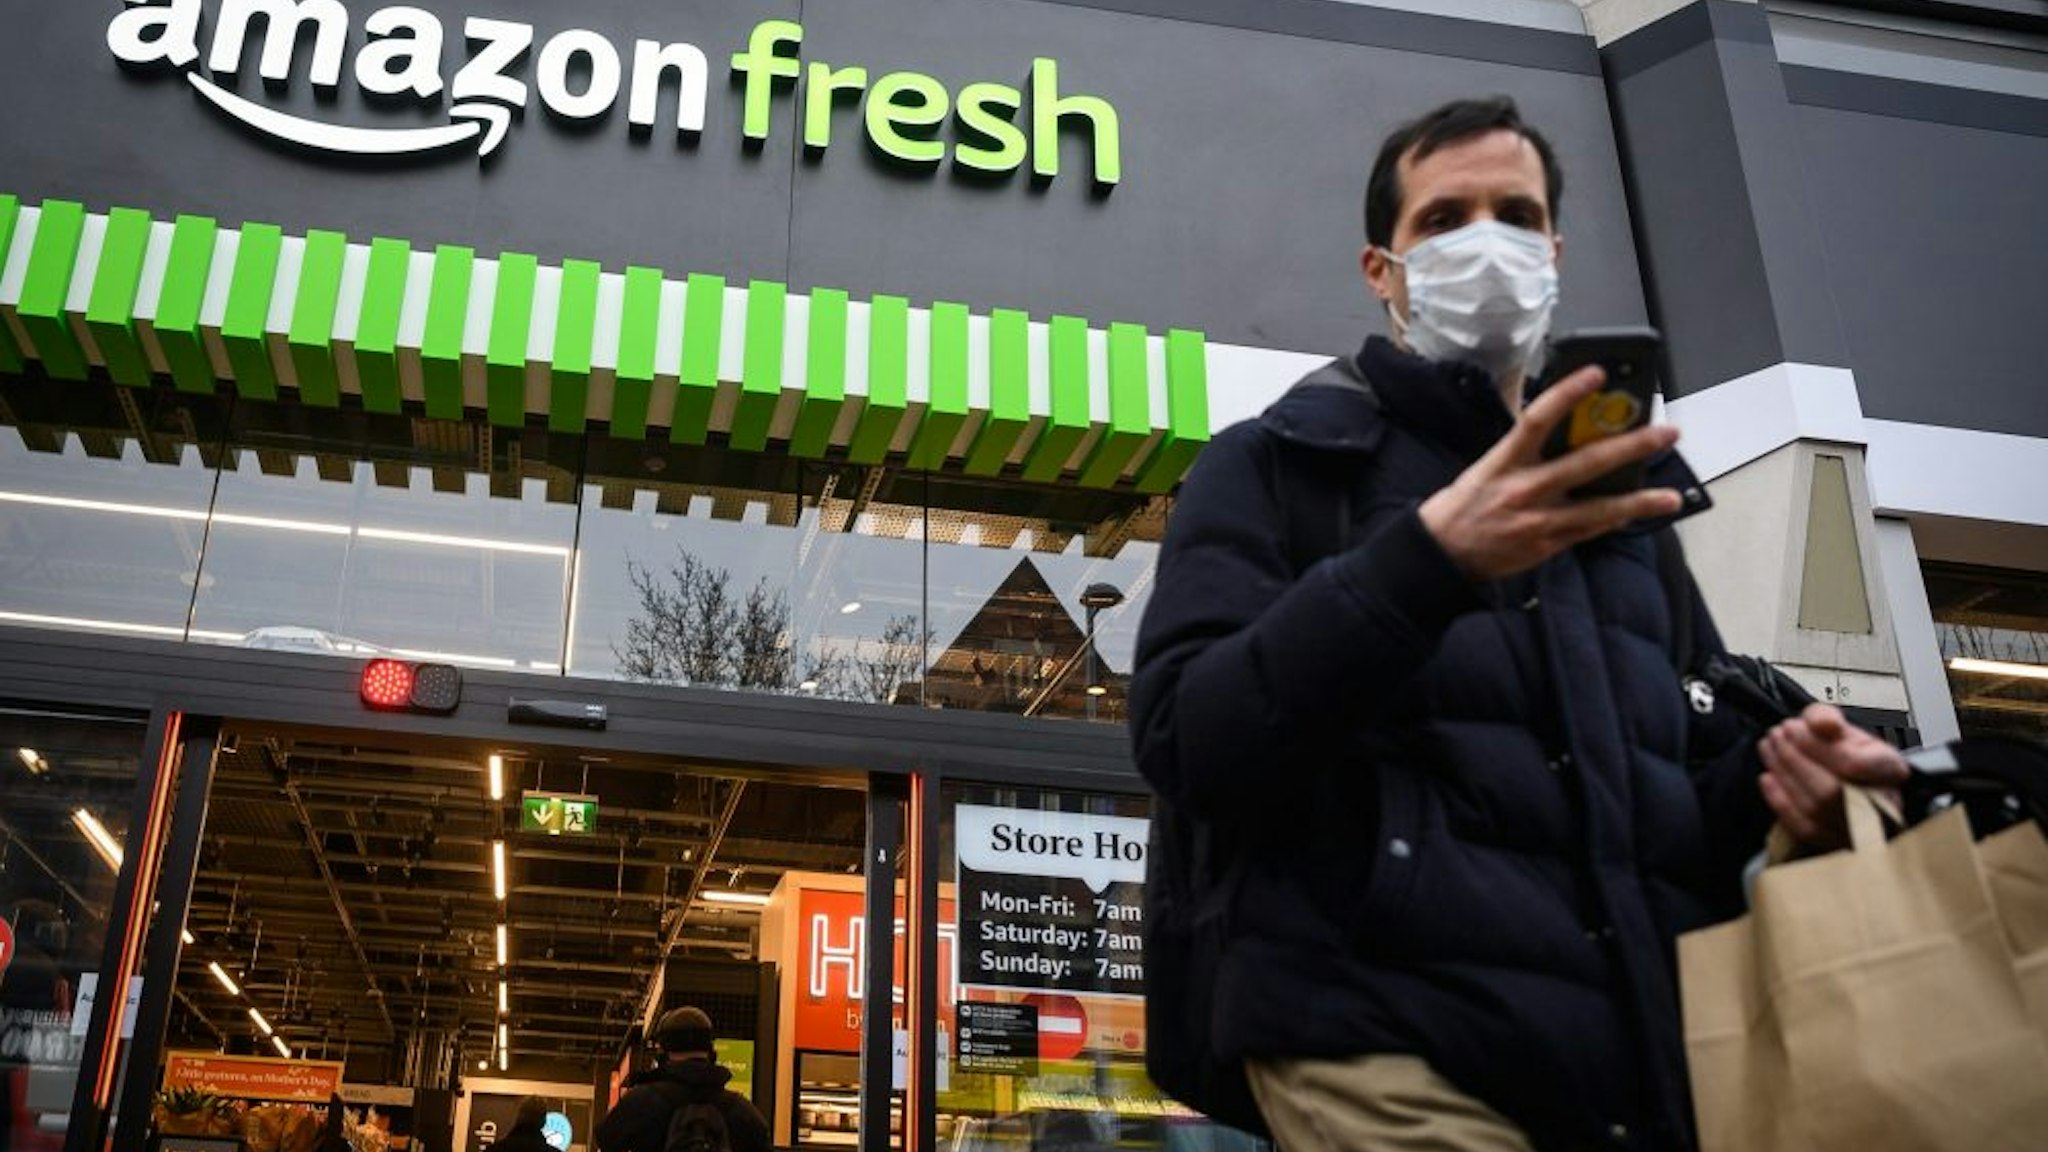 LONDON, ENGLAND - MARCH 04: Customers carry their purchases as they leave the UK's first branch of Amazon Fresh, on March 04, 2021, in the Ealing area of London, England. Shoppers at the Amazon Fresh store, which stocks hundreds of Amazon-owned products and third-party items, check in with a smartphone app upon entry and are automatically billed when they exit, without needing to scan individual items. The location is Amazon's first "just walk out" shop outside the United States.